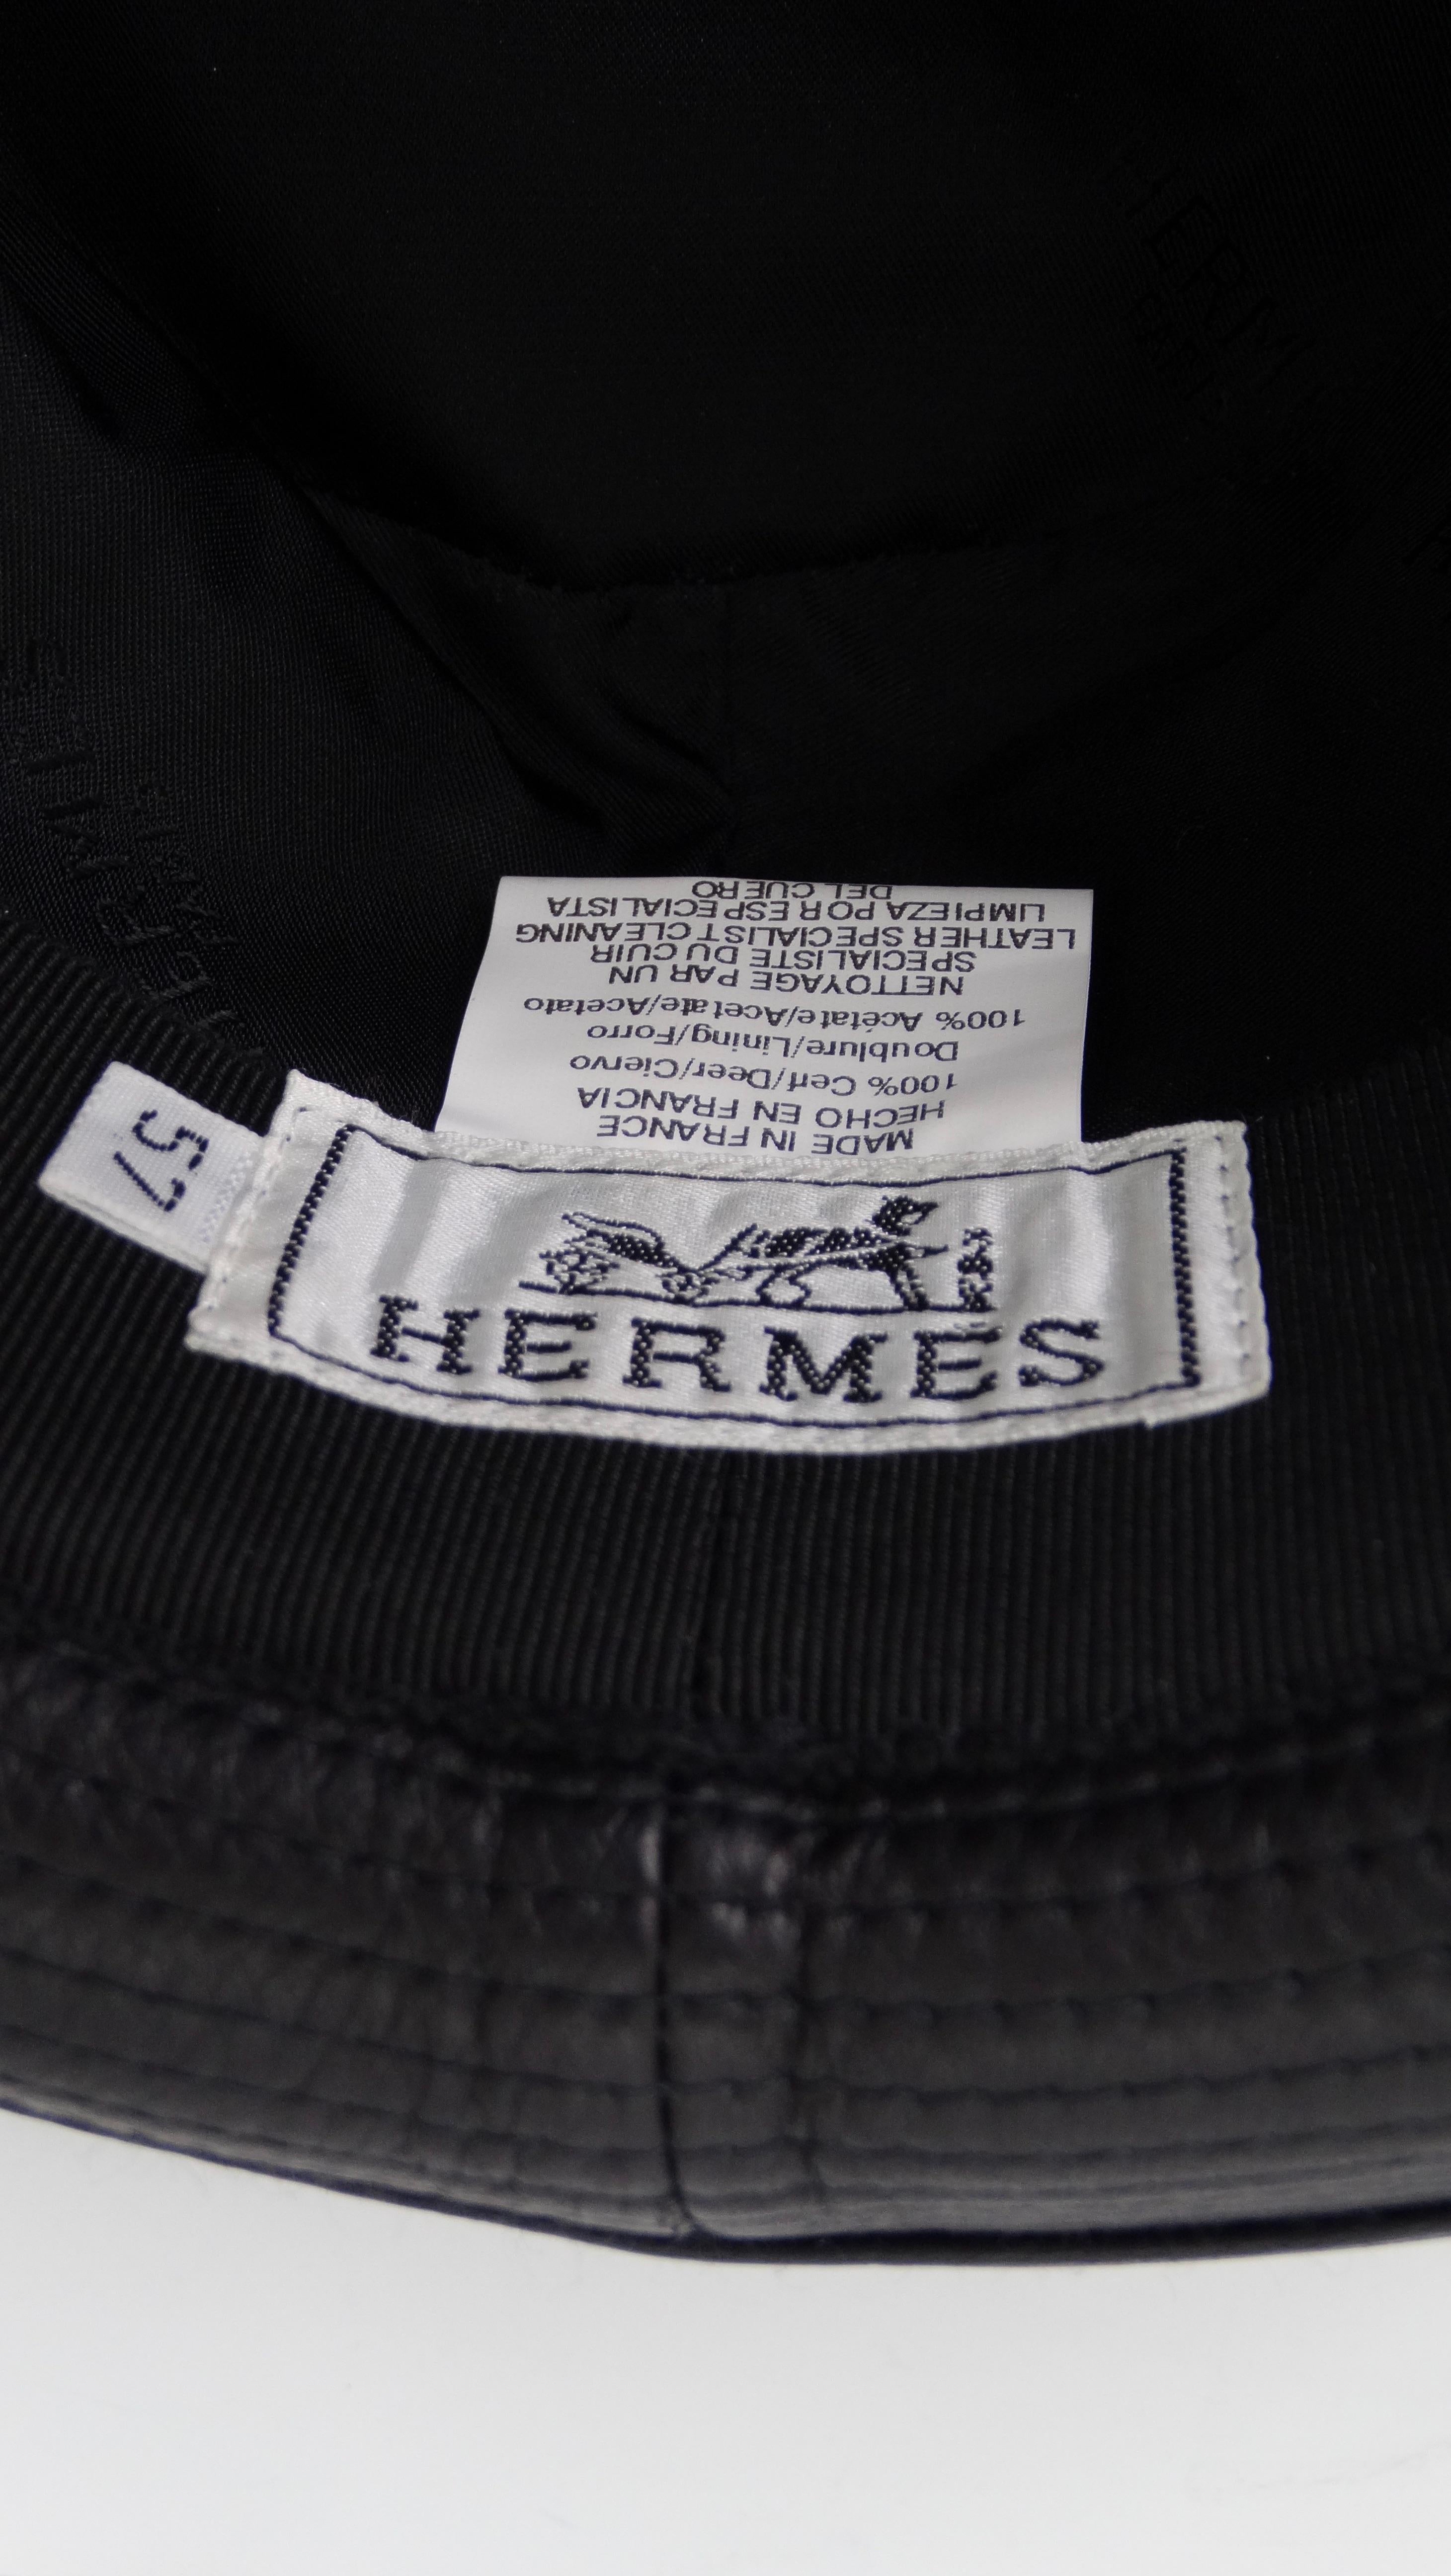 Hermes Clémence Leather Hat in Black Taurillon In Excellent Condition For Sale In Scottsdale, AZ